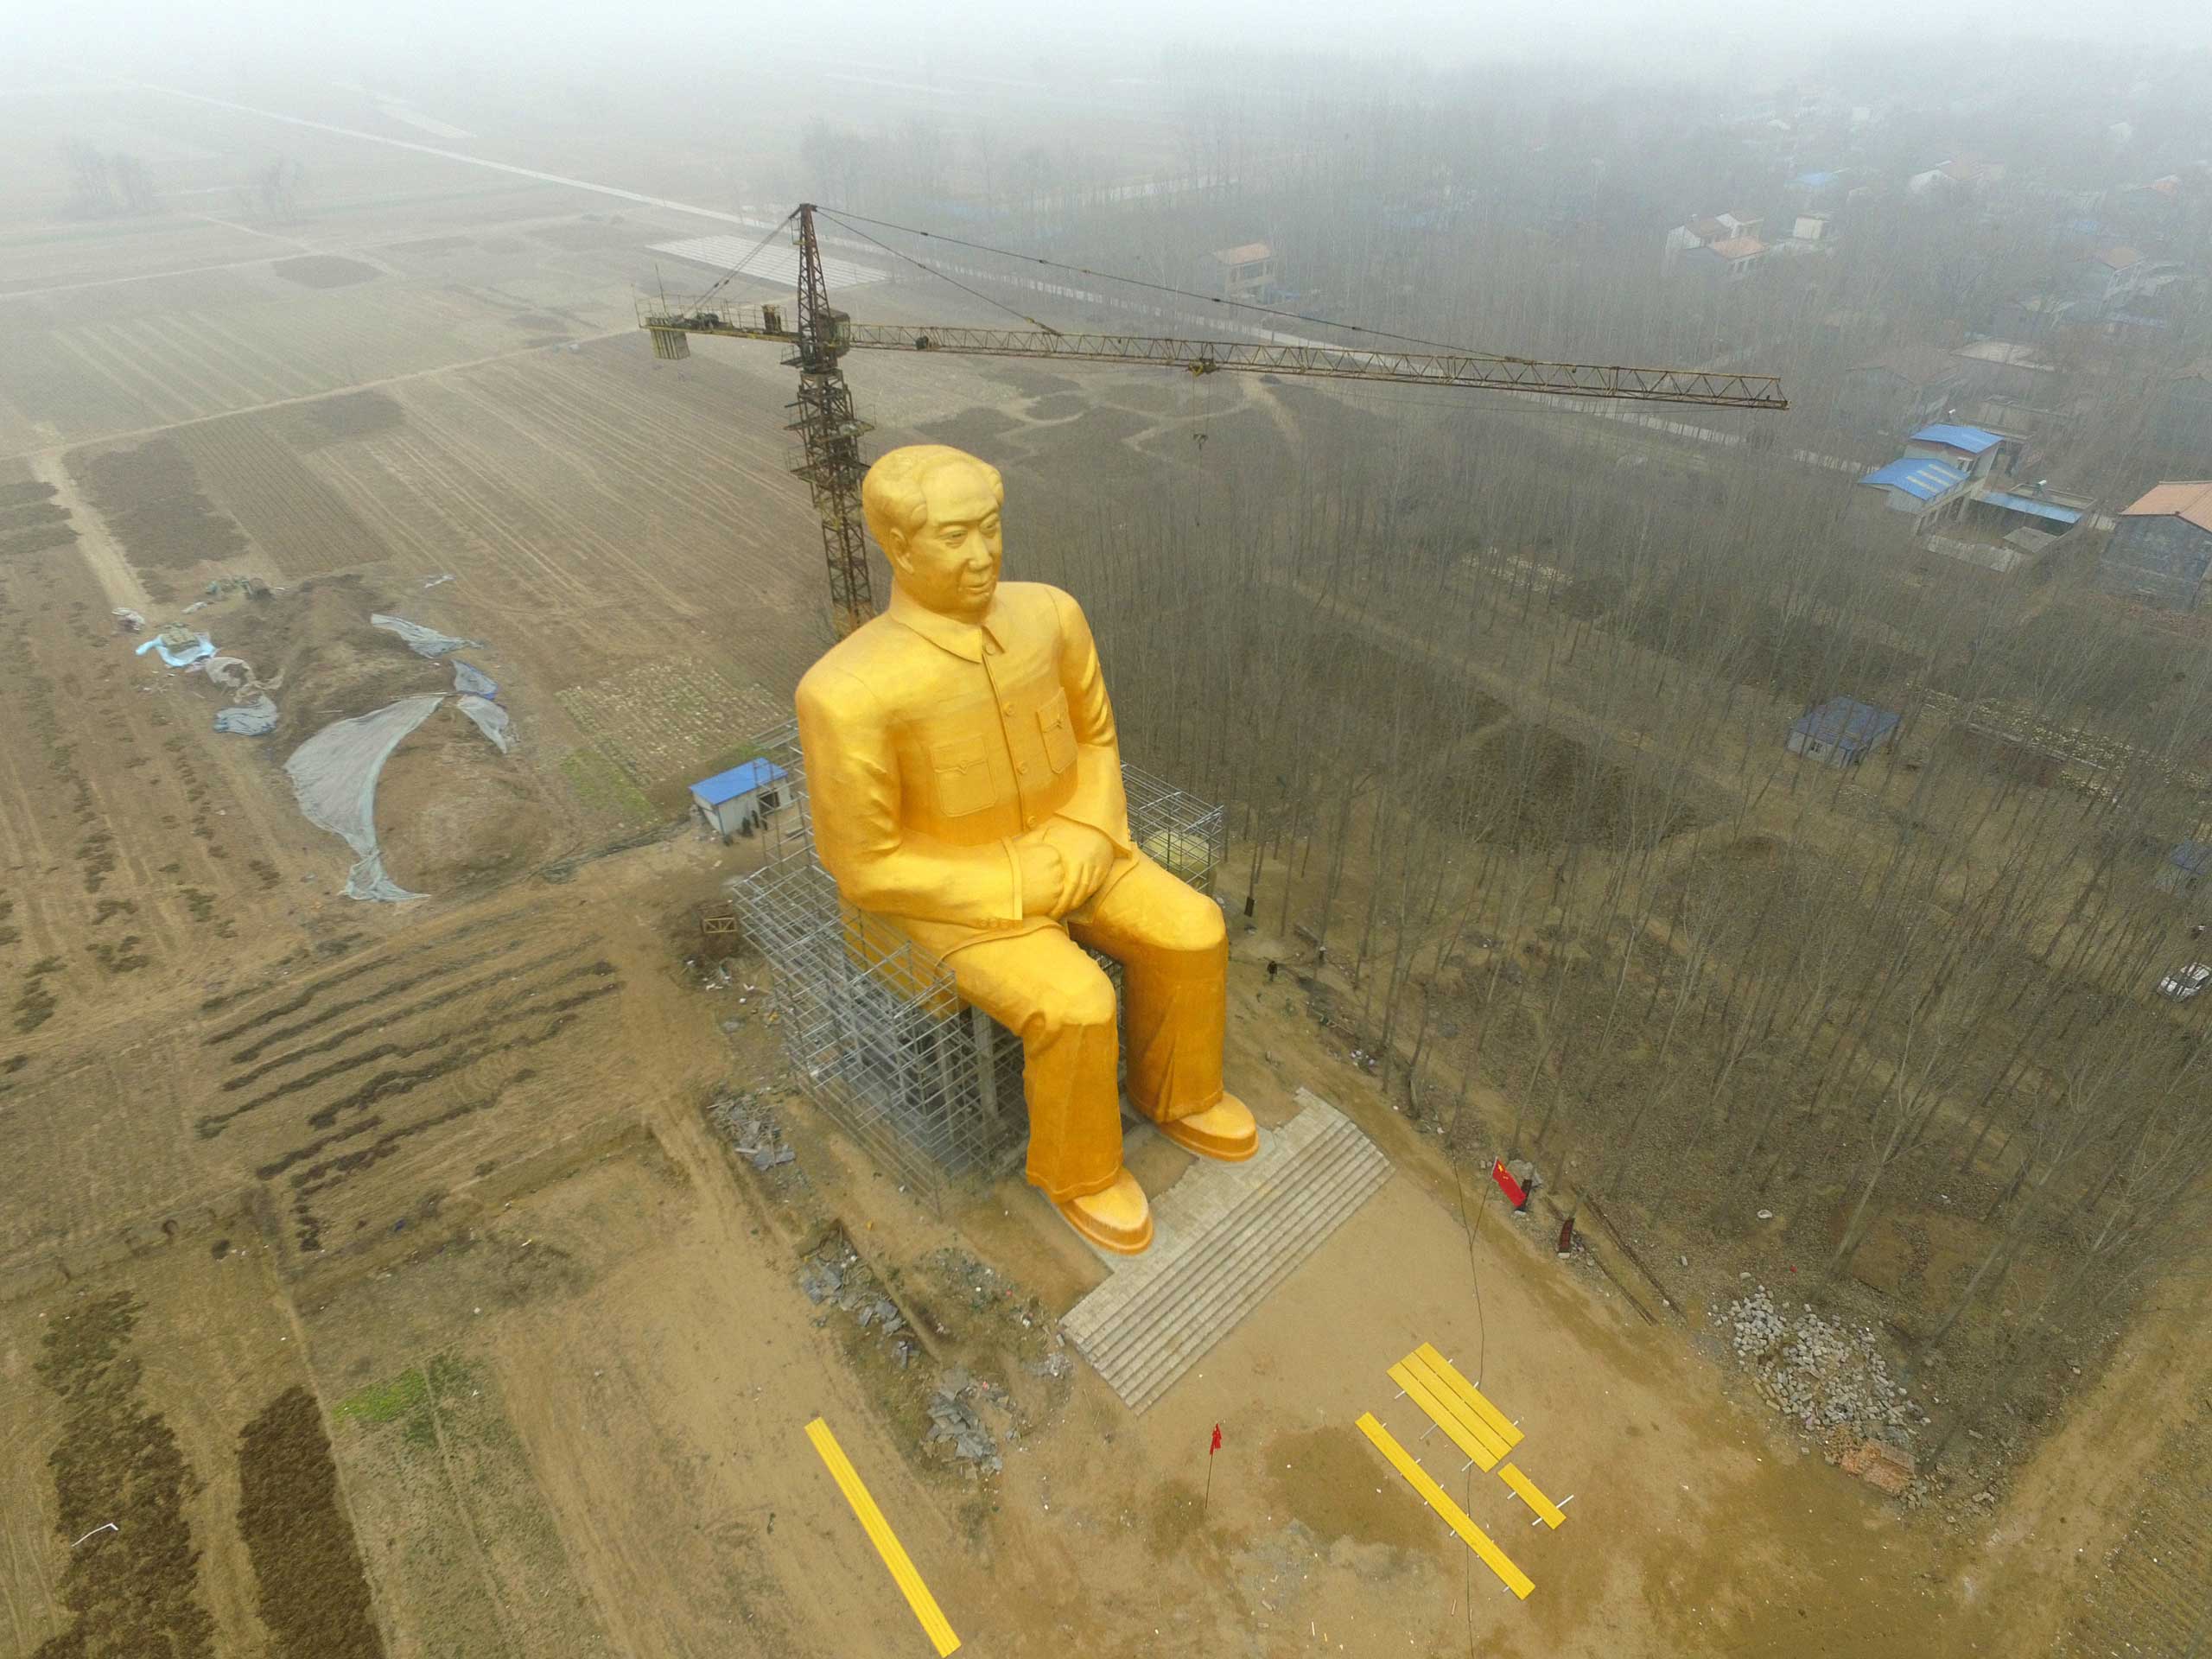 A huge statue of Chairman Mao Zedong, 36.6 meters in height, is seen under construction at Zhushigang village in Tongxu County, China, on Jan. 4. (ChinaFotoPress—Getty Images)